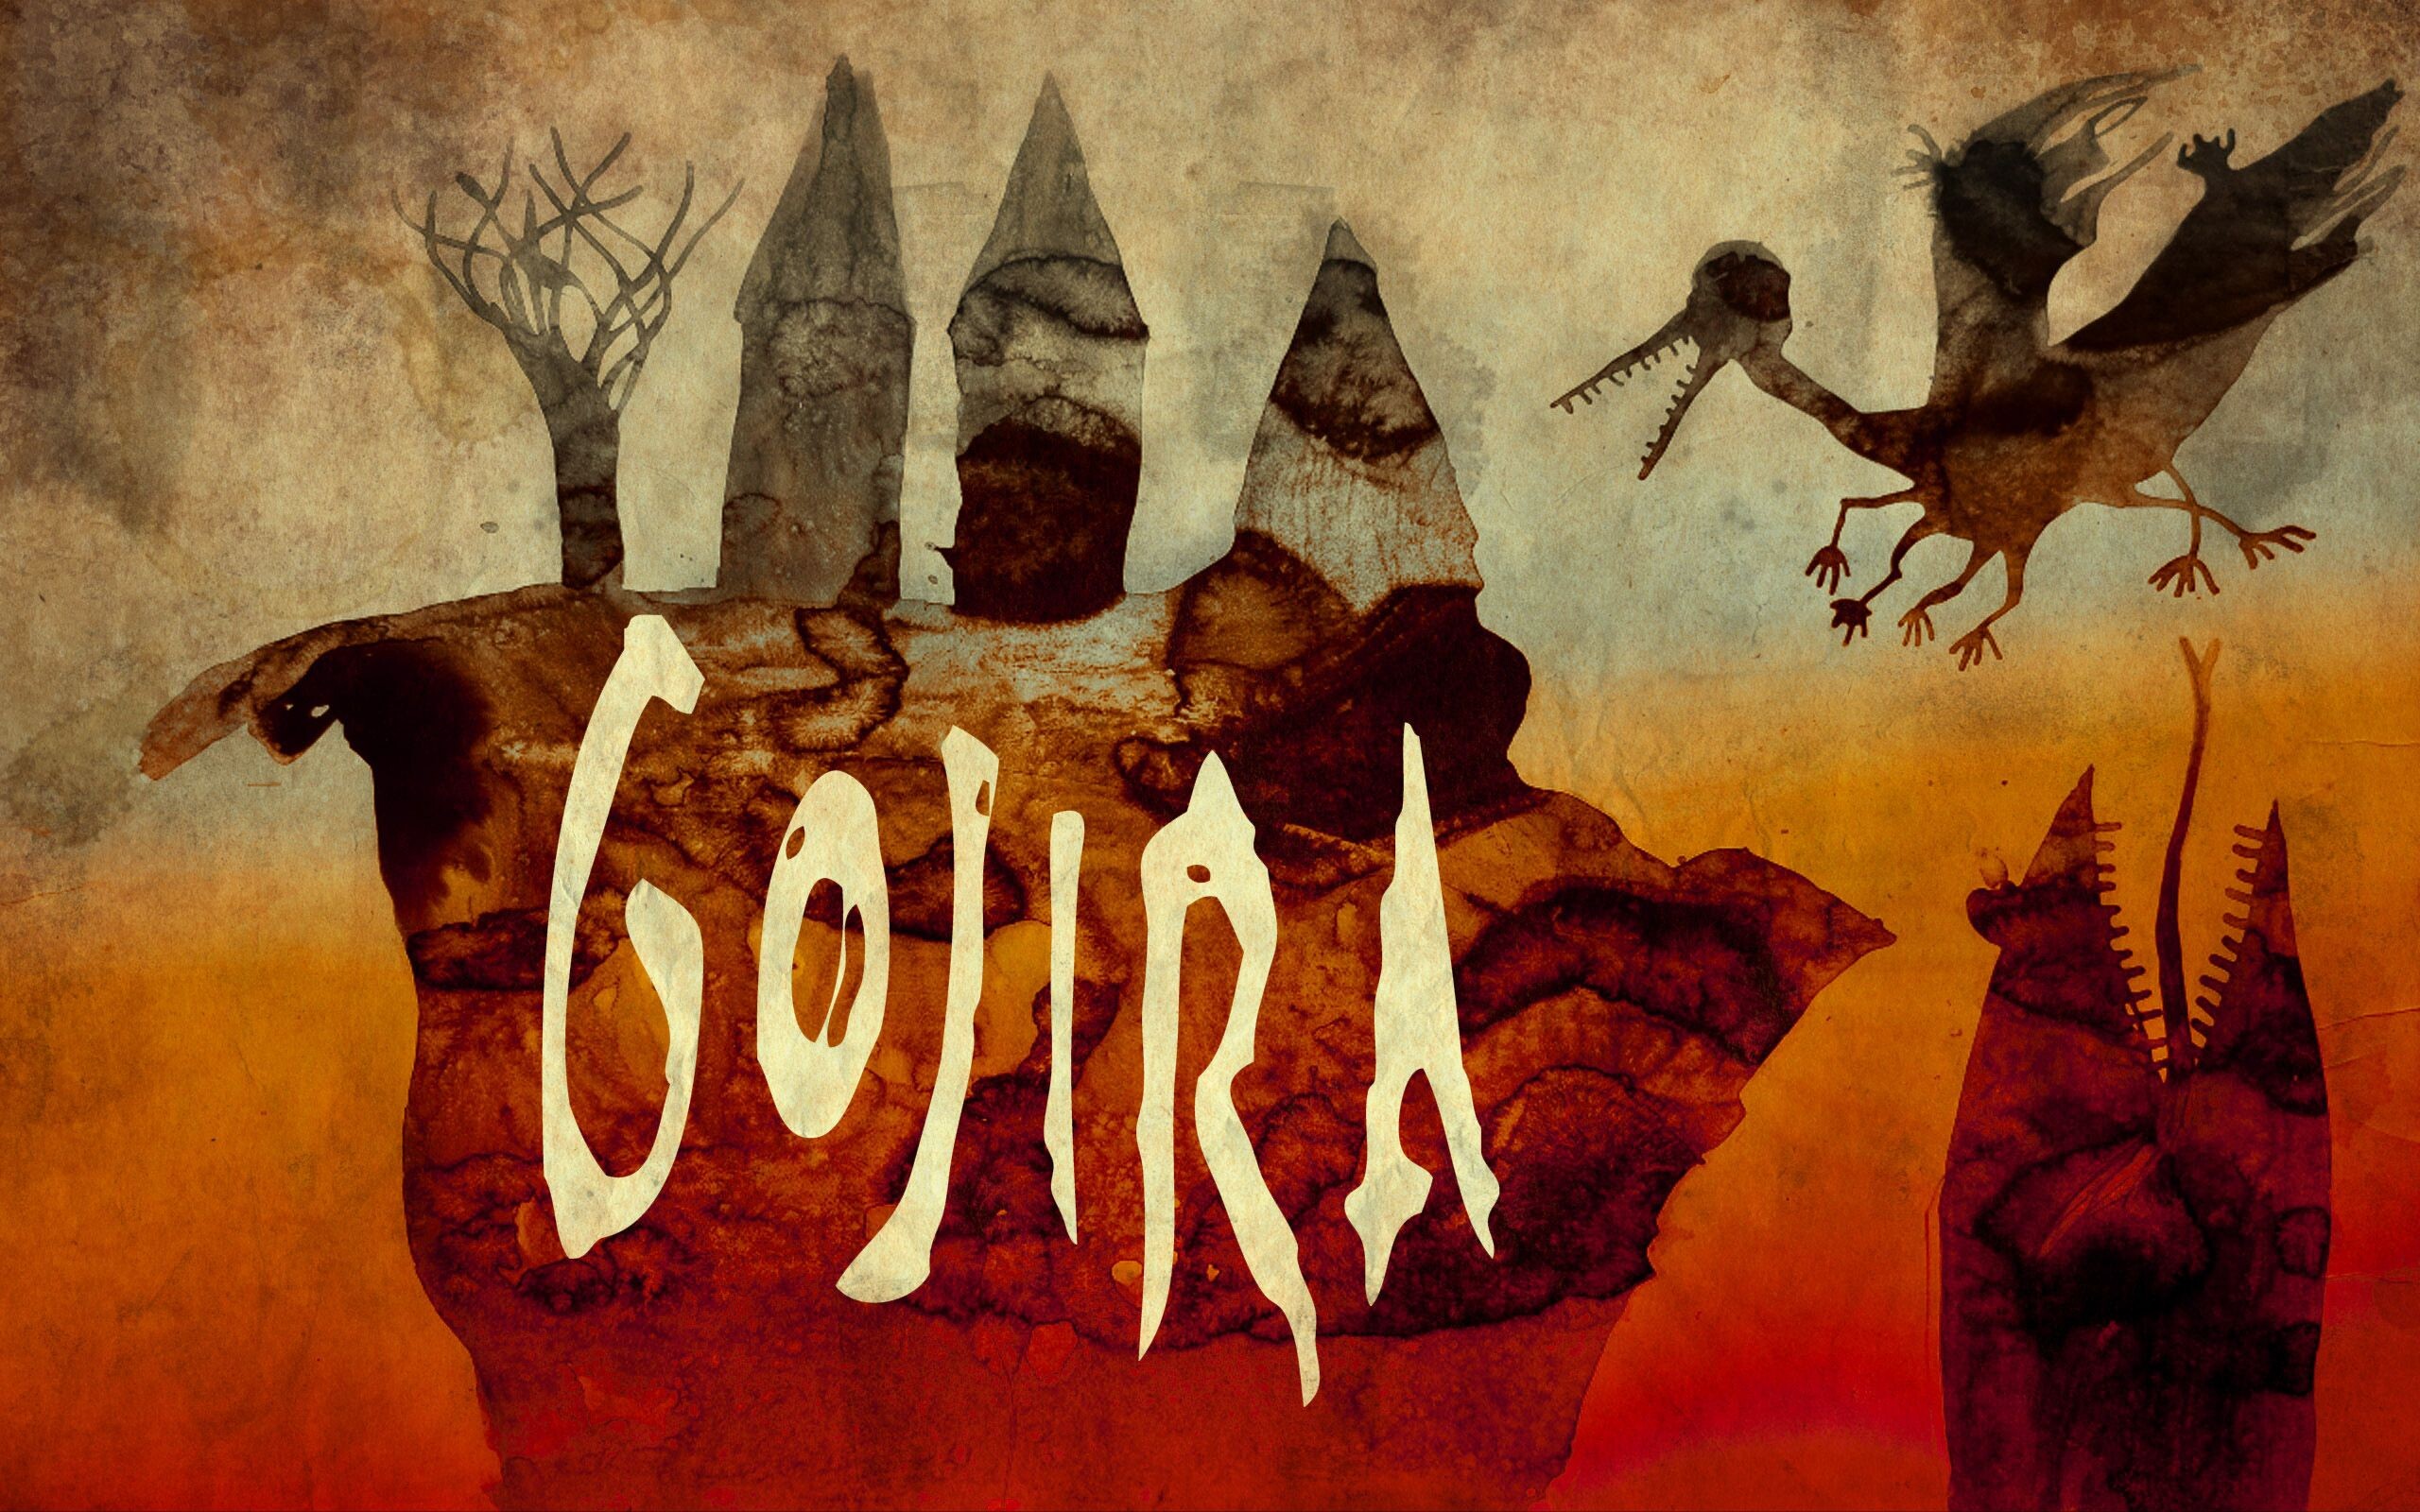 Gojira (Band): The music group that was founded in 1996 as Godzilla, Psychedelic rock. 2560x1600 HD Wallpaper.